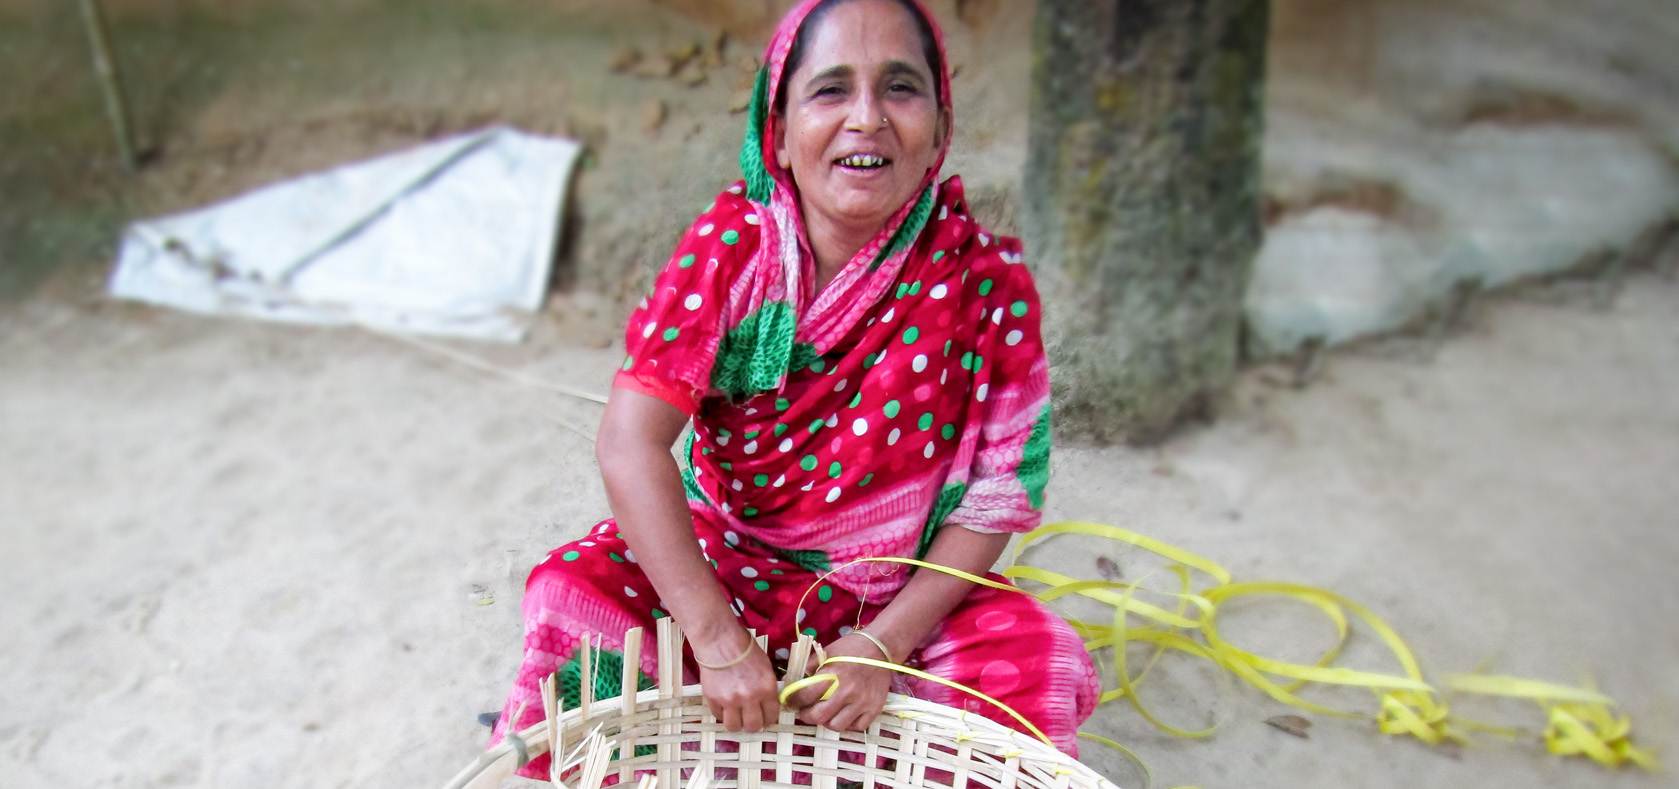 Shahana Begum on 02 September, 2021, from Noapur, Cumilla, is skillfully weaving a basket made from bamboo. She has chosen to fight for survivors of violence, much like herself. Photo: DRISTI/Shyamal Barua Boby.